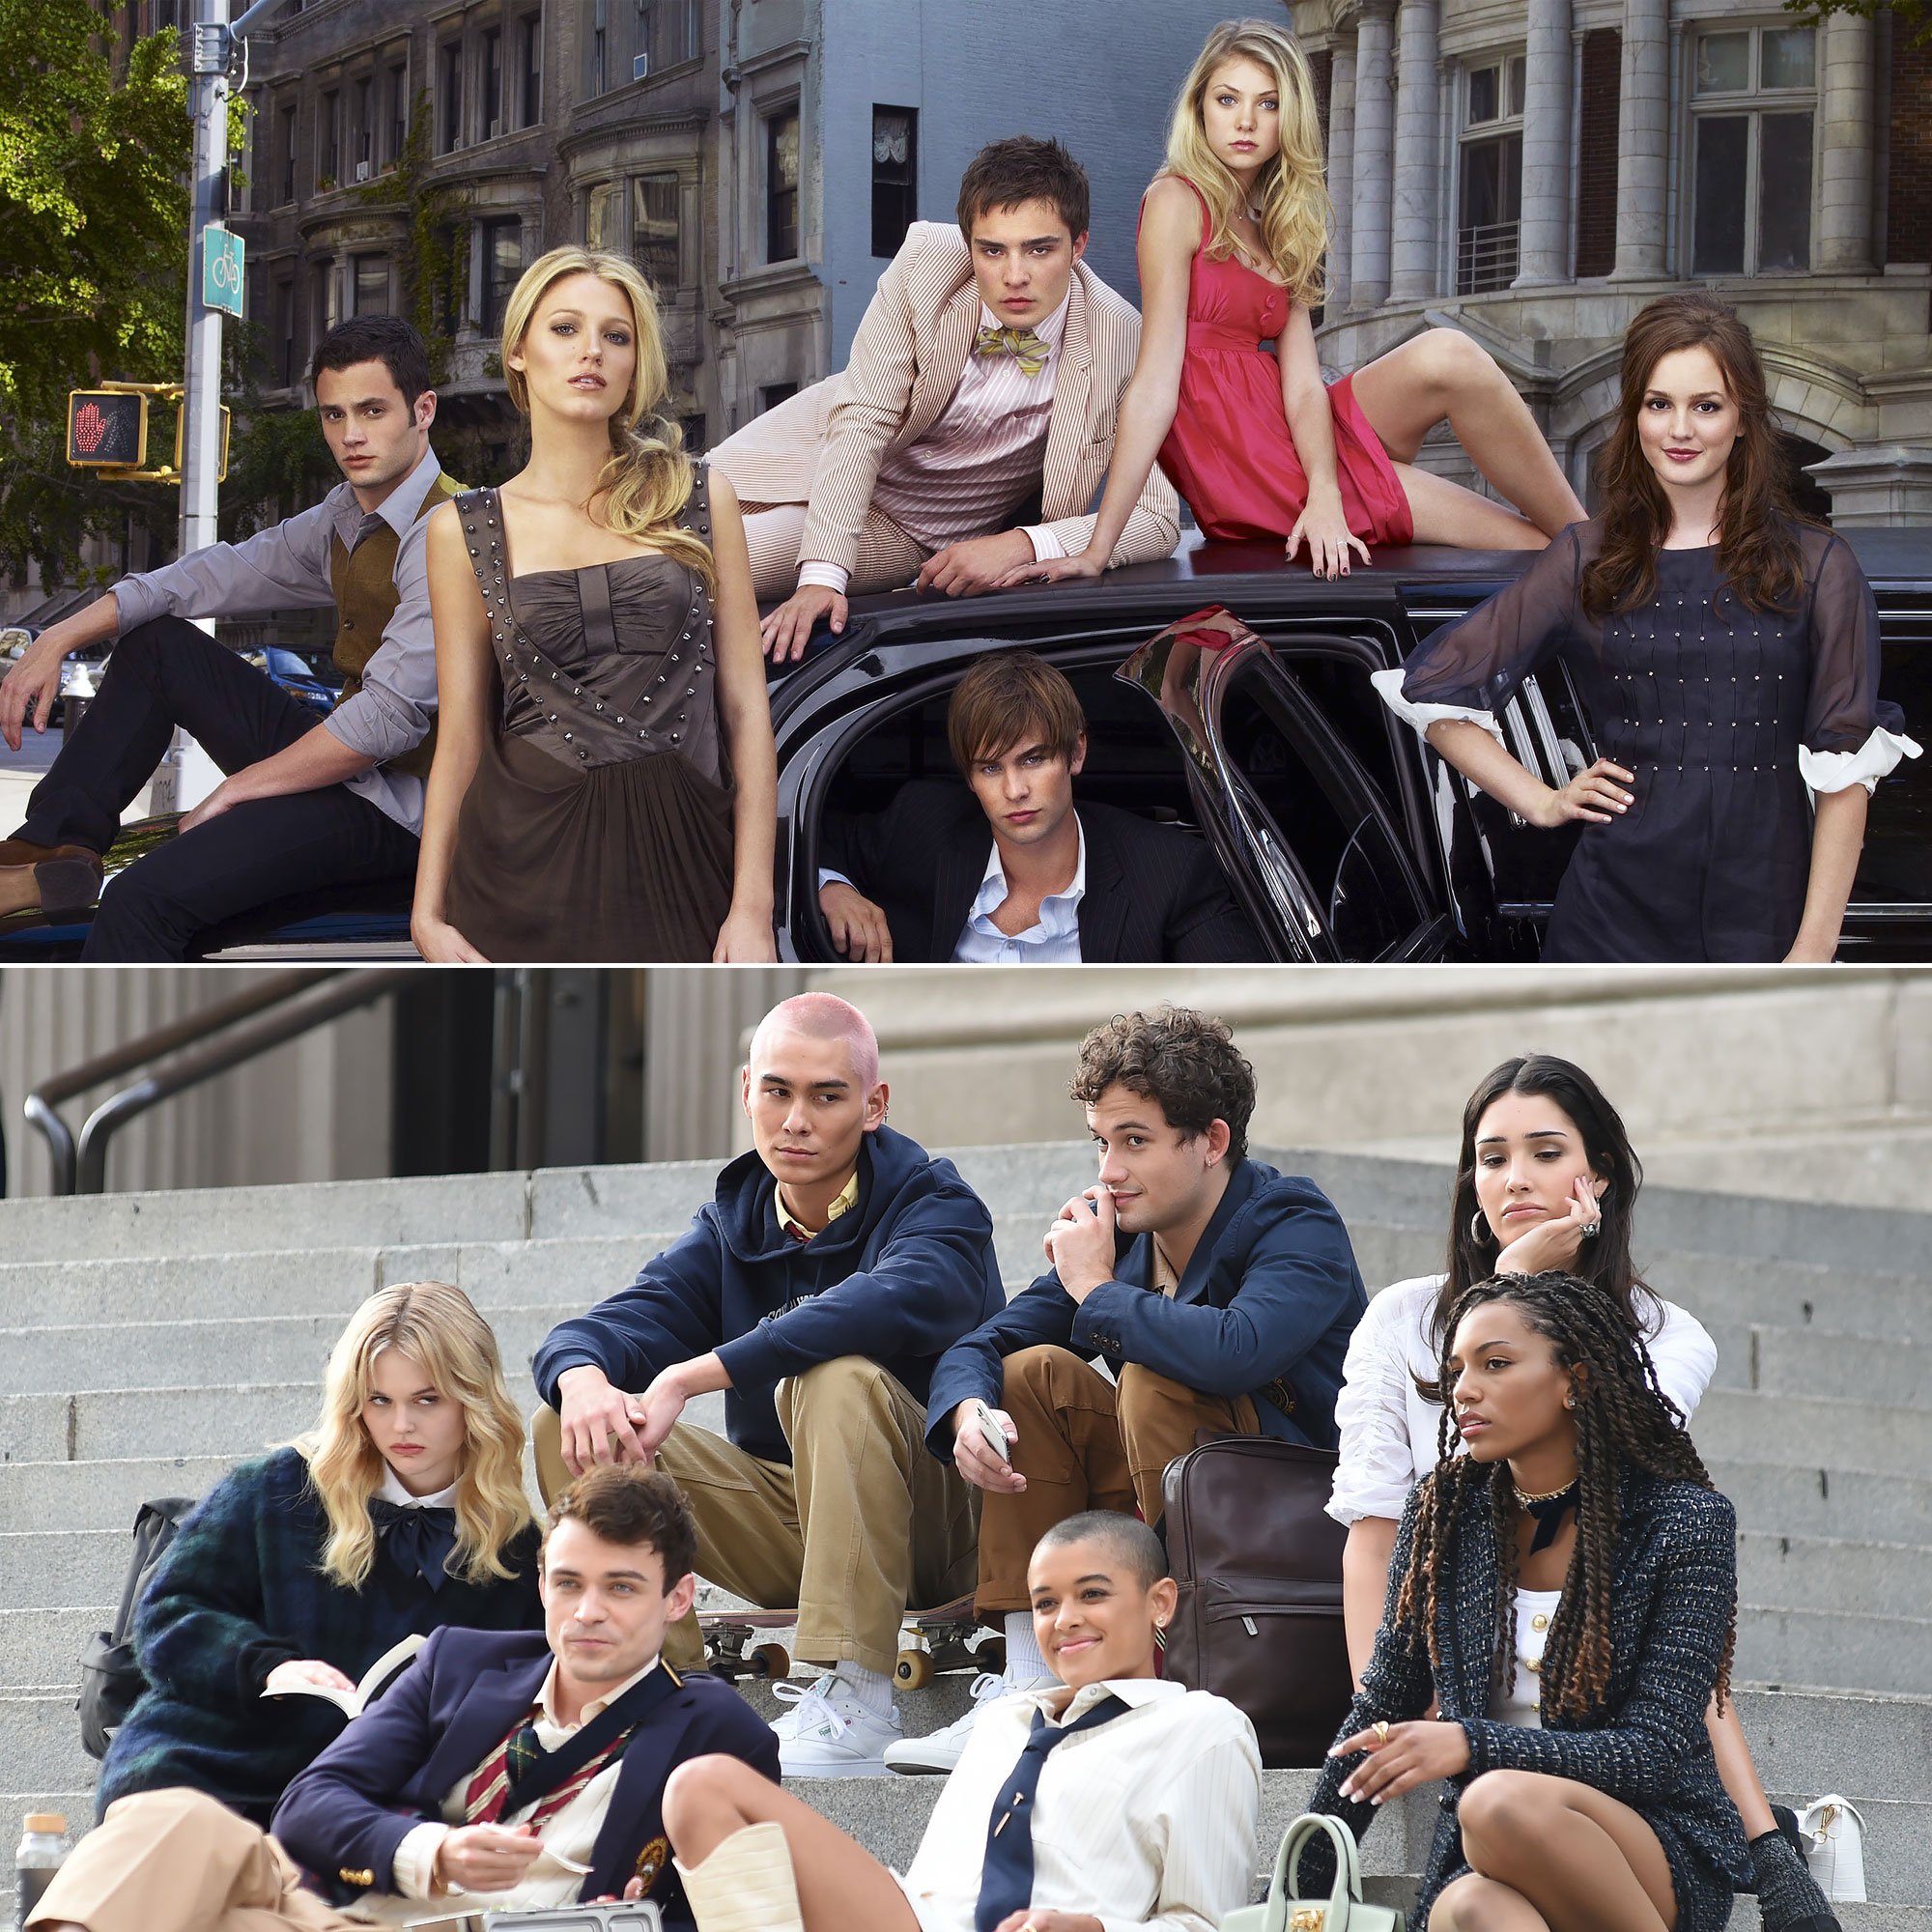 Attention Upper East Siders: the Gossip Girl reboot returns this